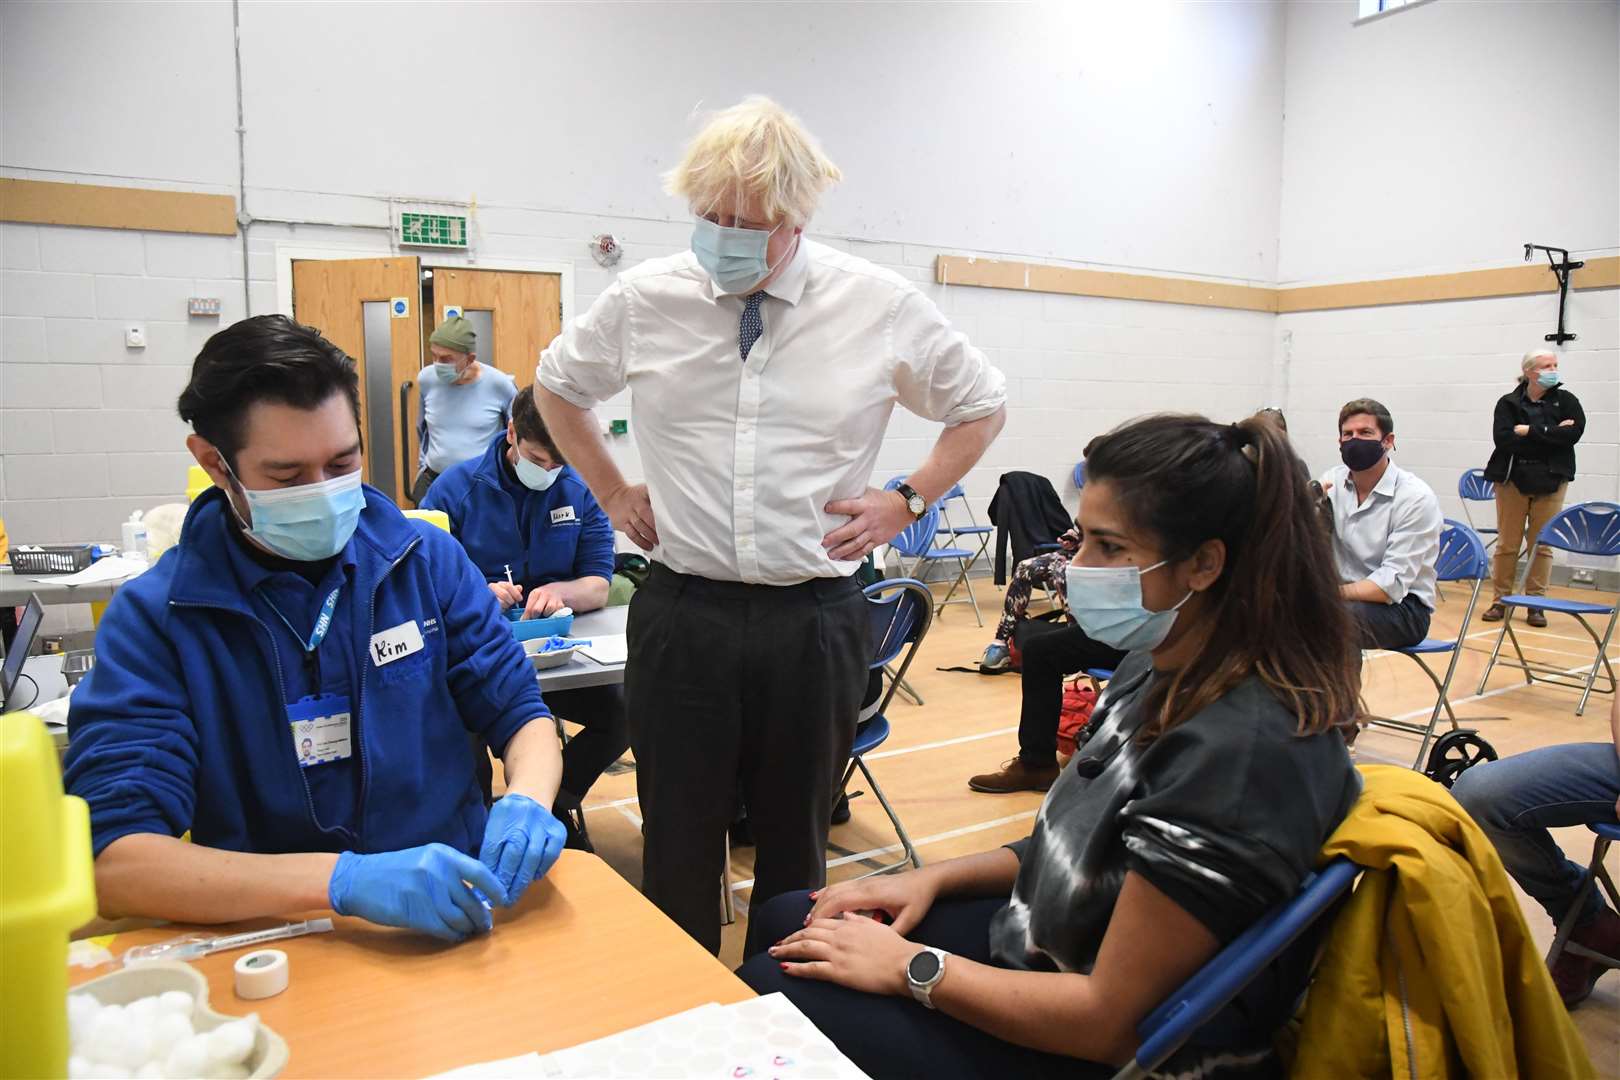 Boris Johnson during a visit to the Stow Health vaccination centre in Westminster (PA)